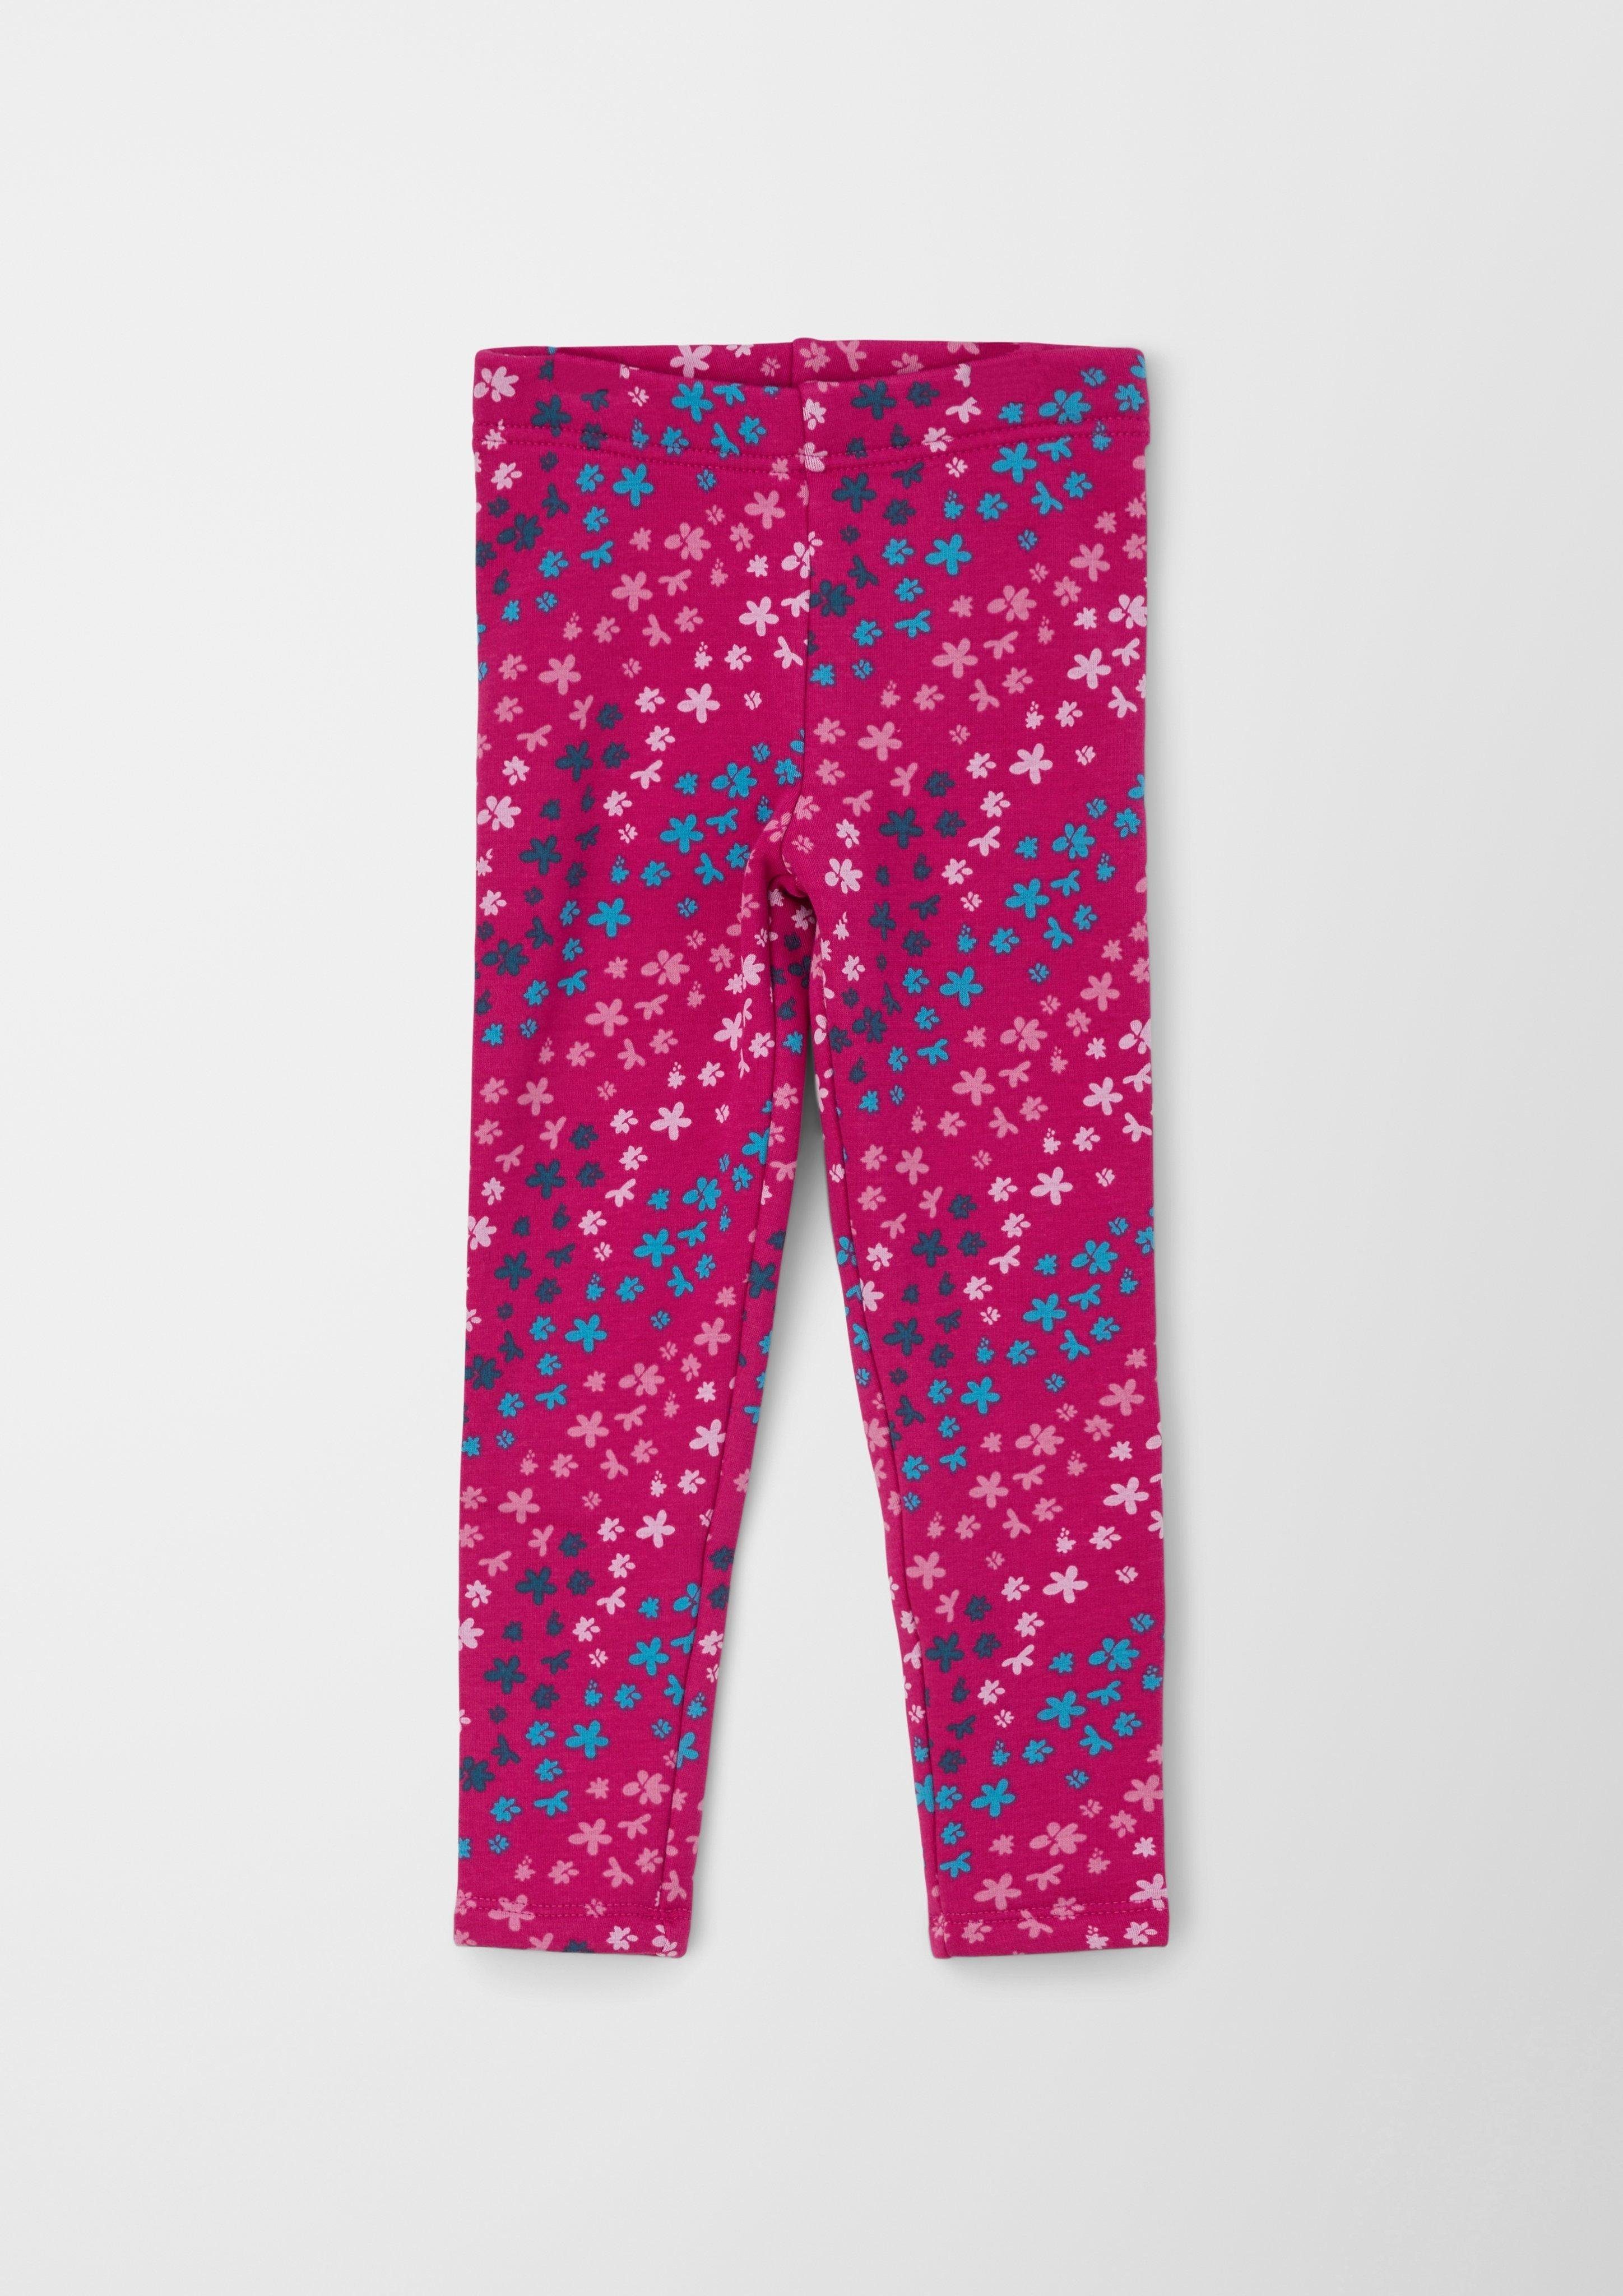 Thermofleece-Futter Leggings Leggings pink s.Oliver mit